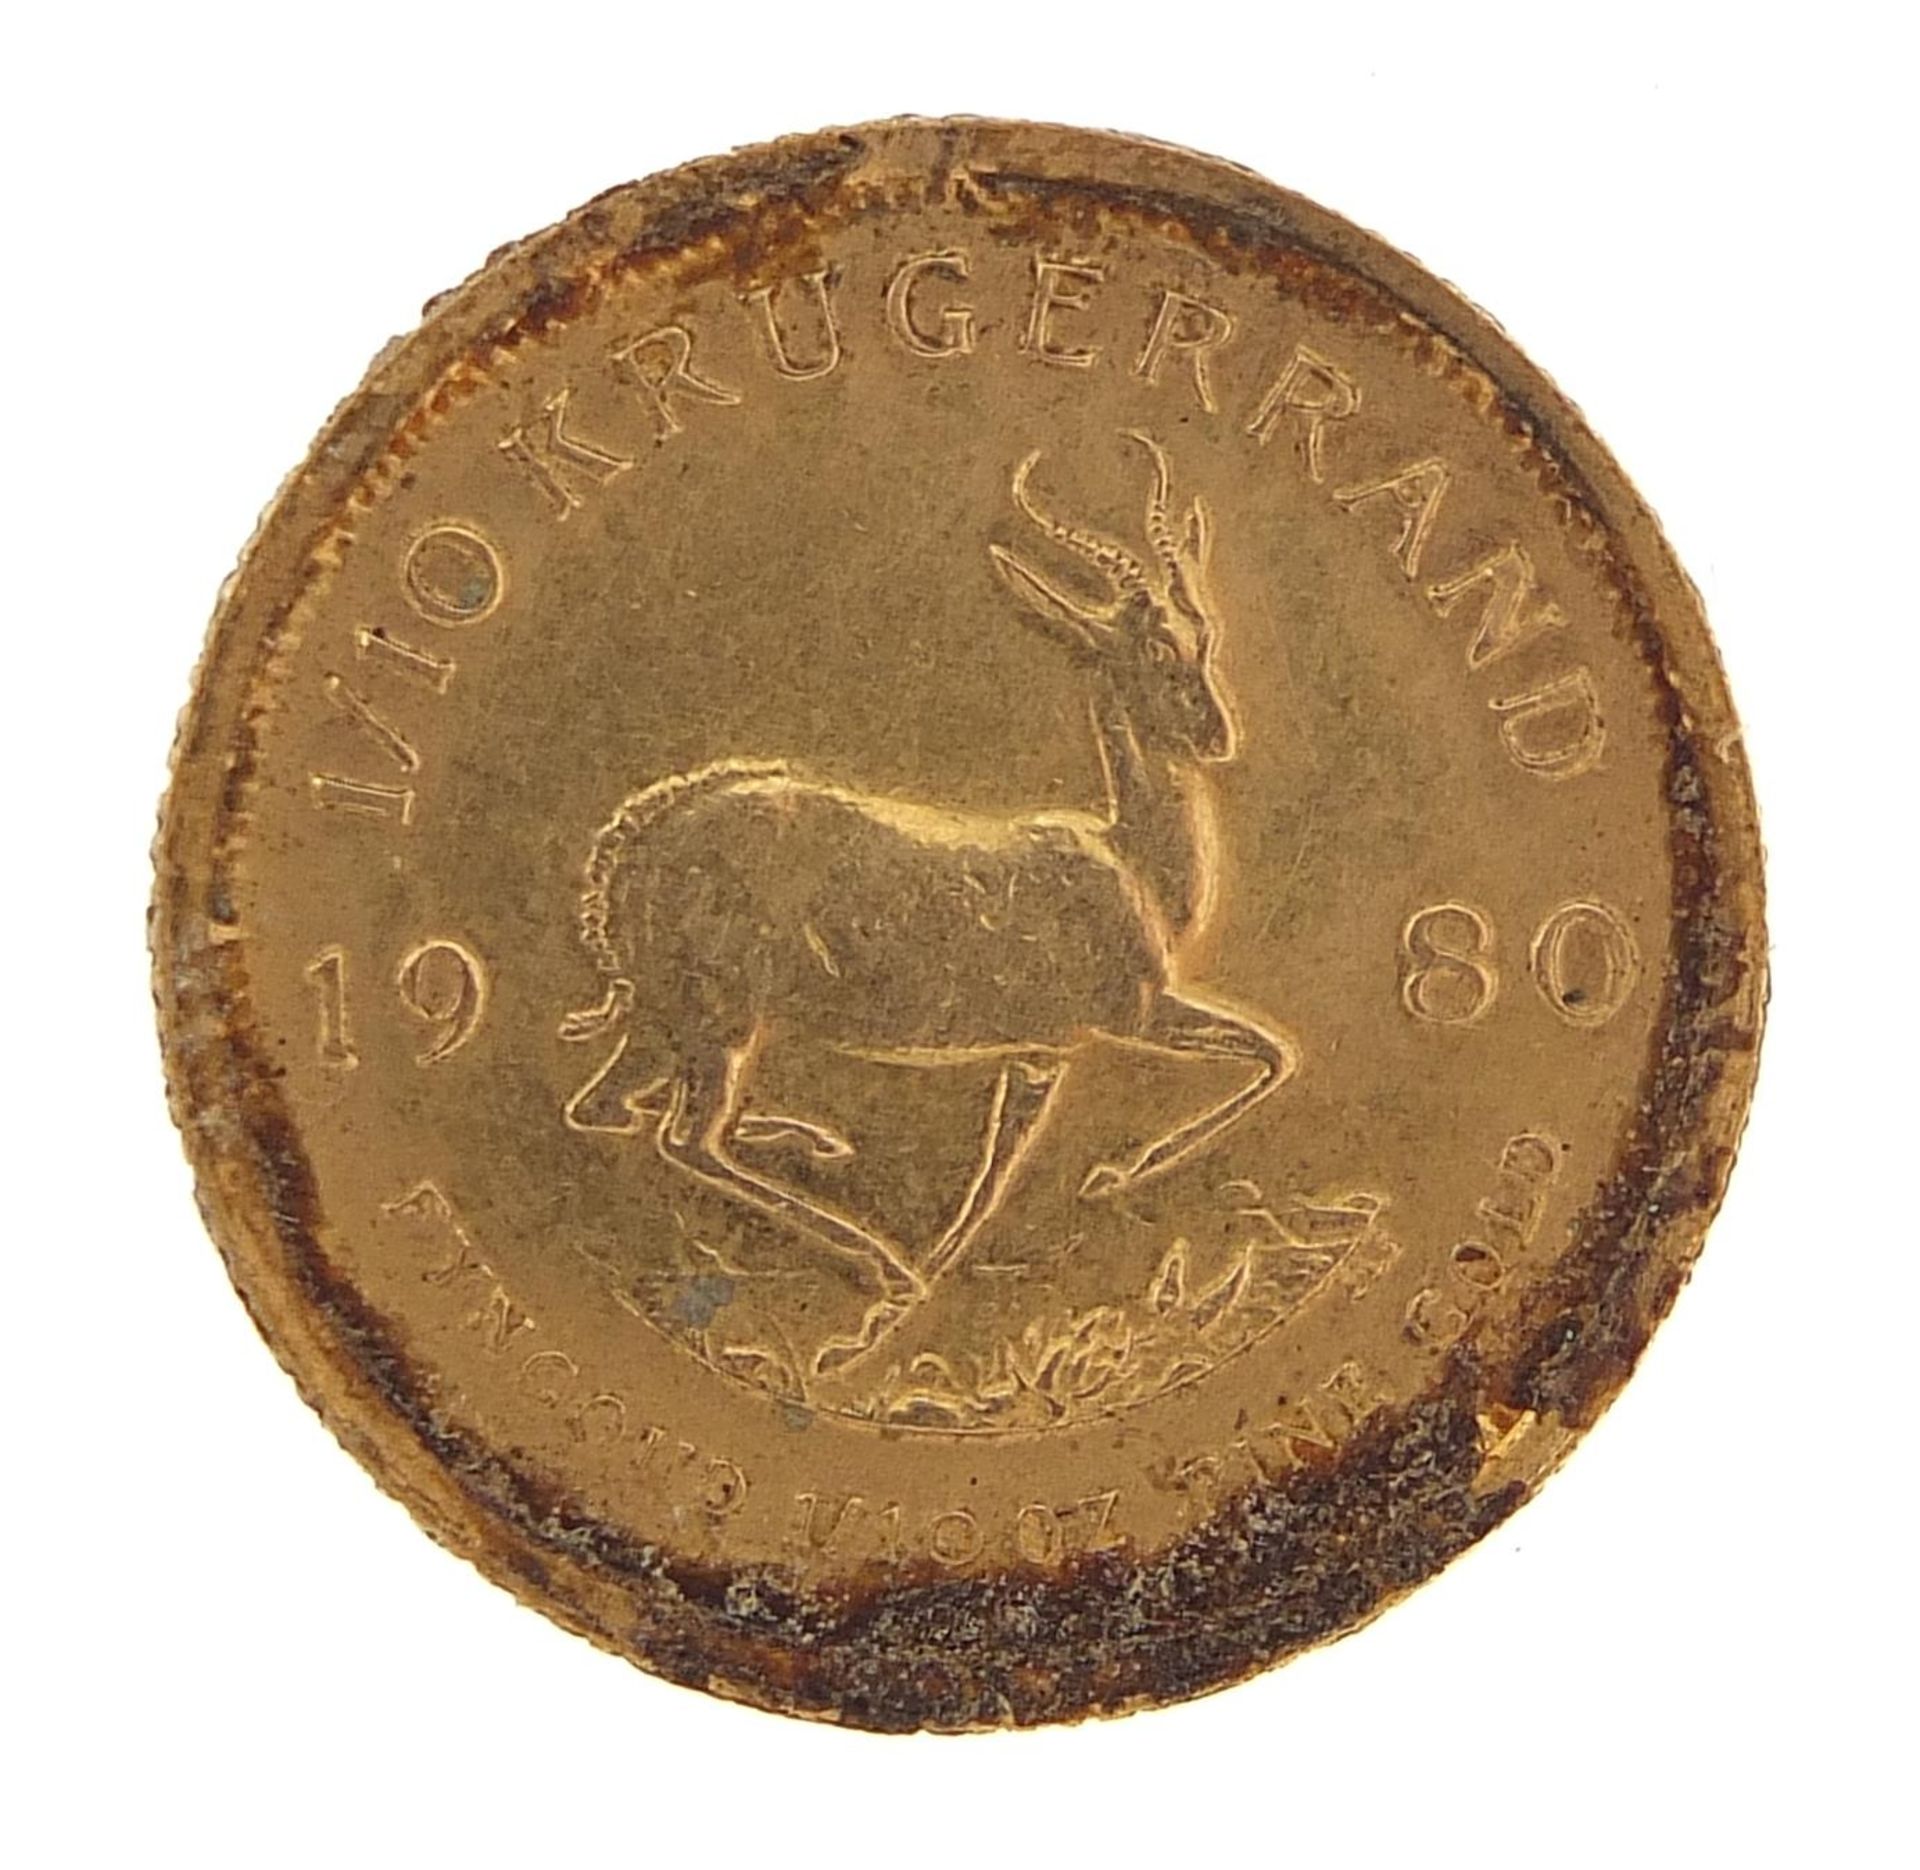 South African 1980 gold 1/10th krugerrand - this lot is sold without buyer's premium